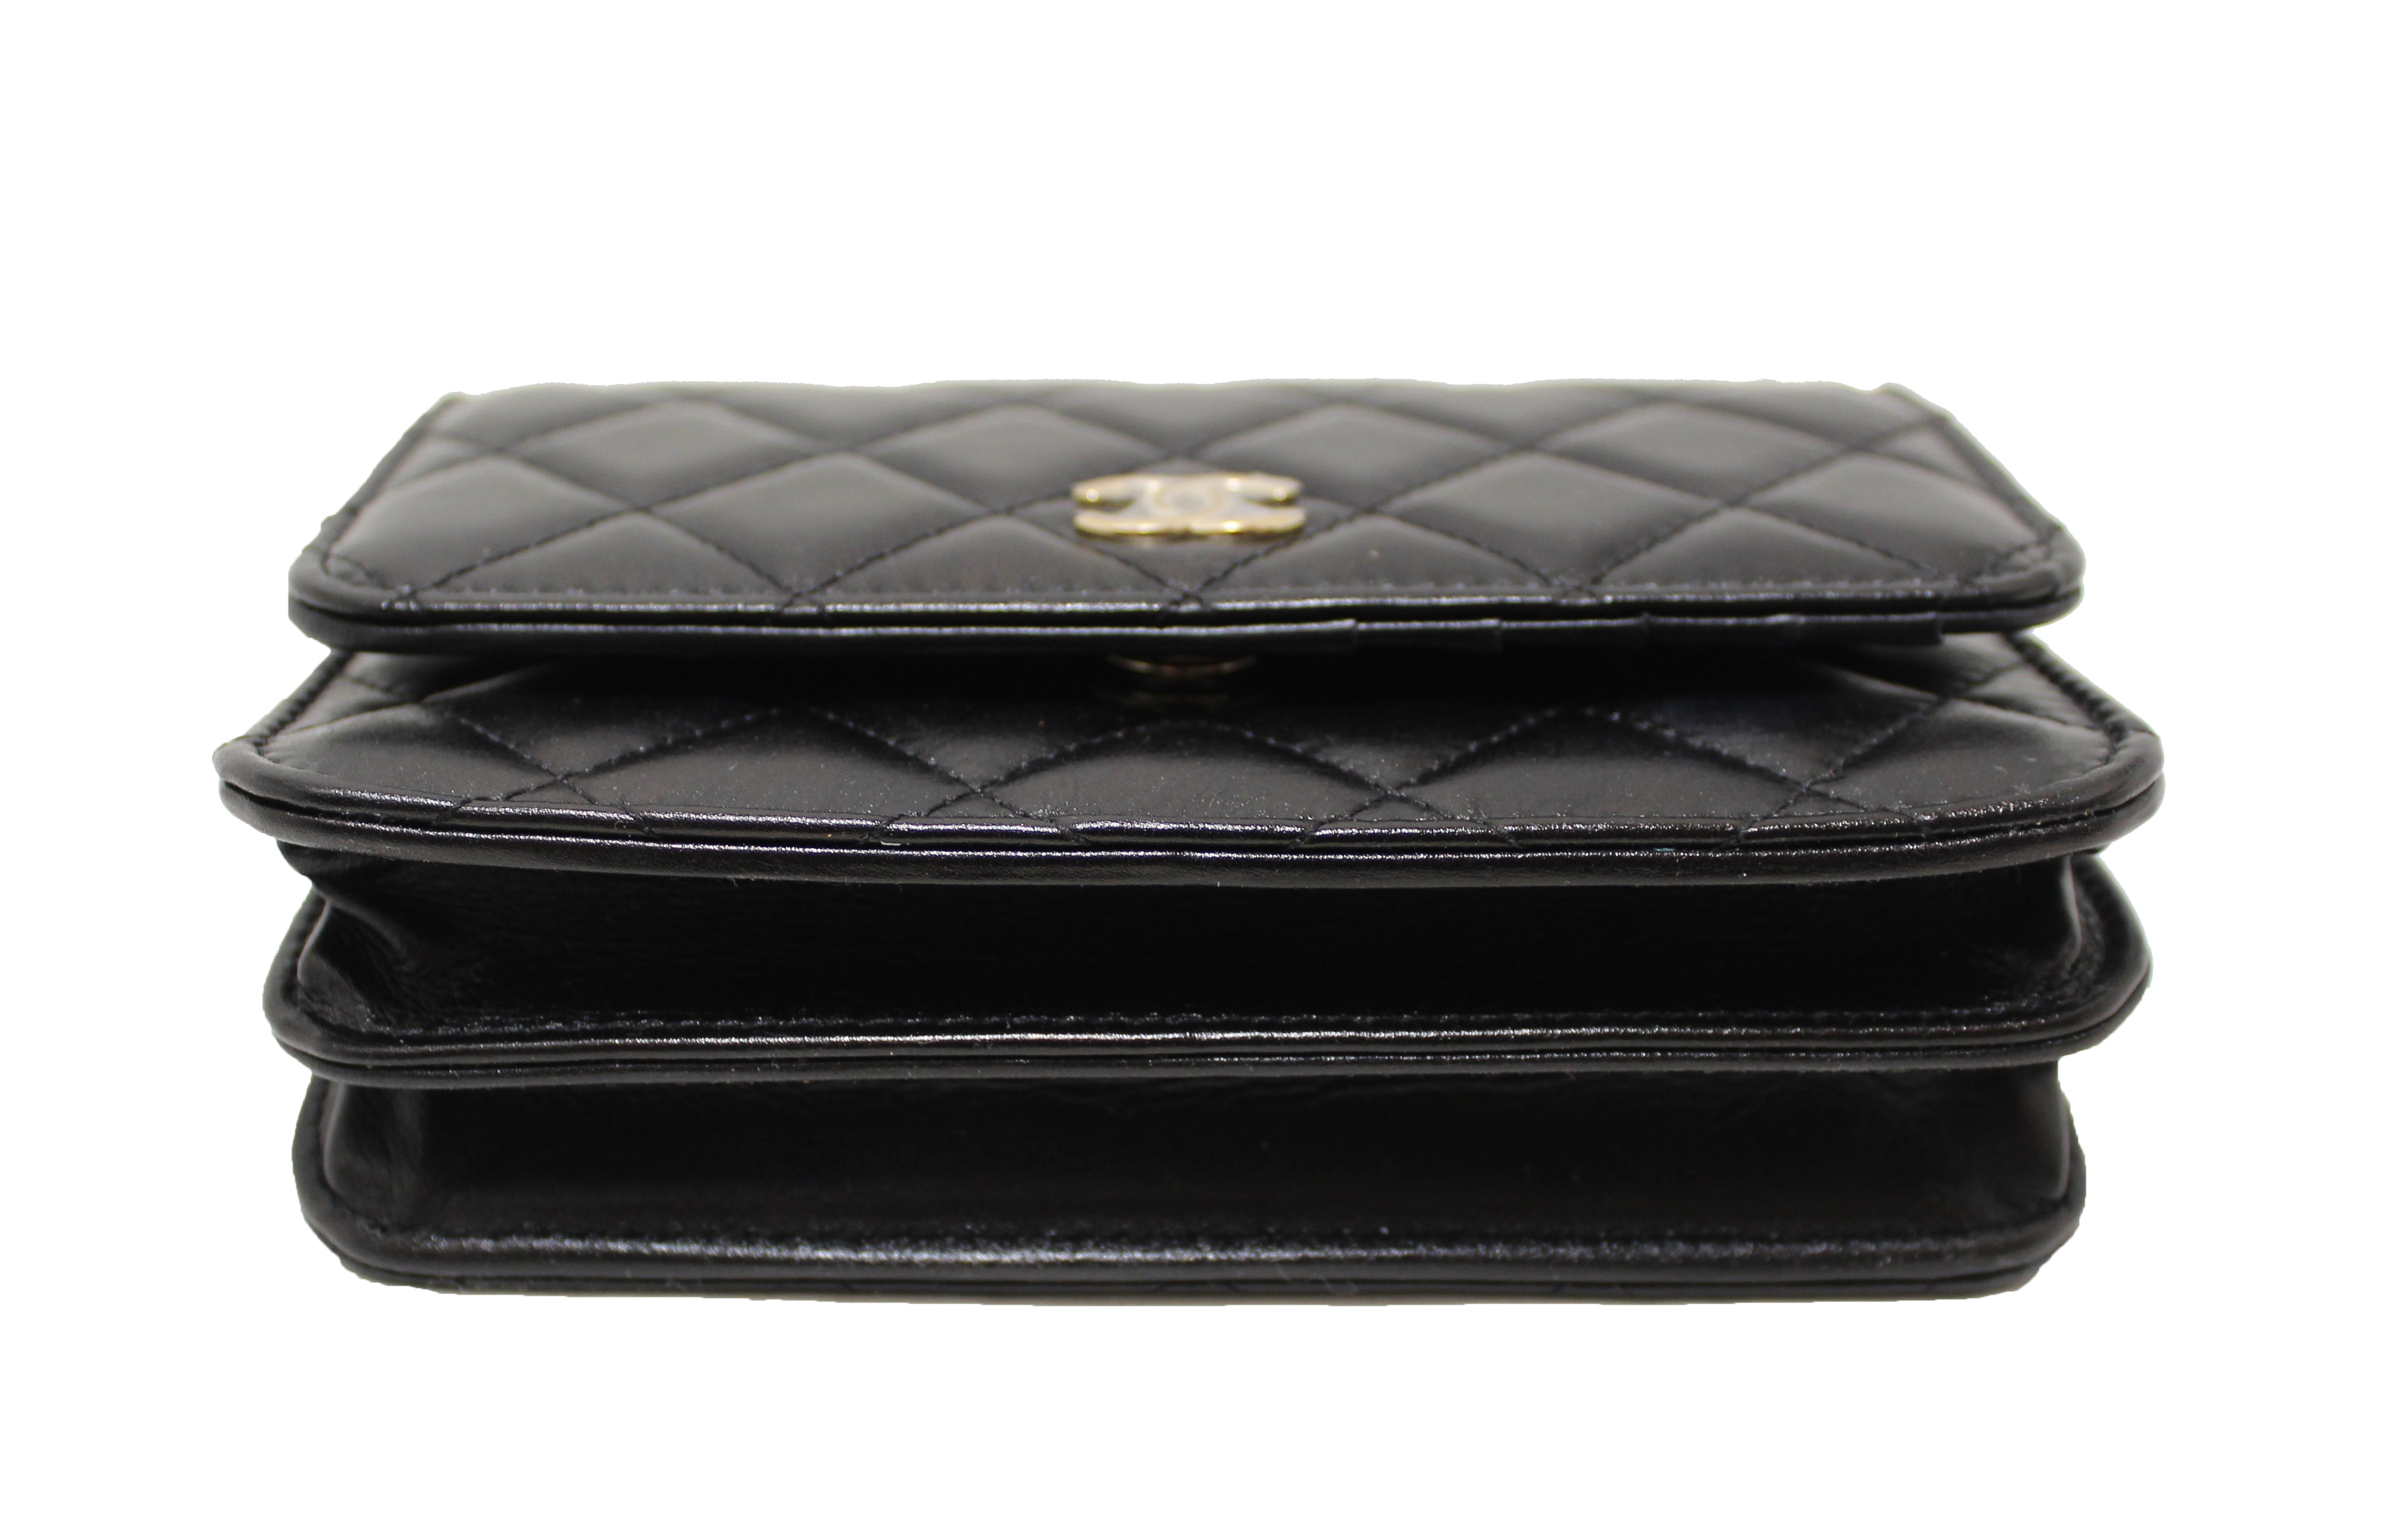 Authentic Chanel Black Quilted Calfskin Leather Wallet with Pearl Chain